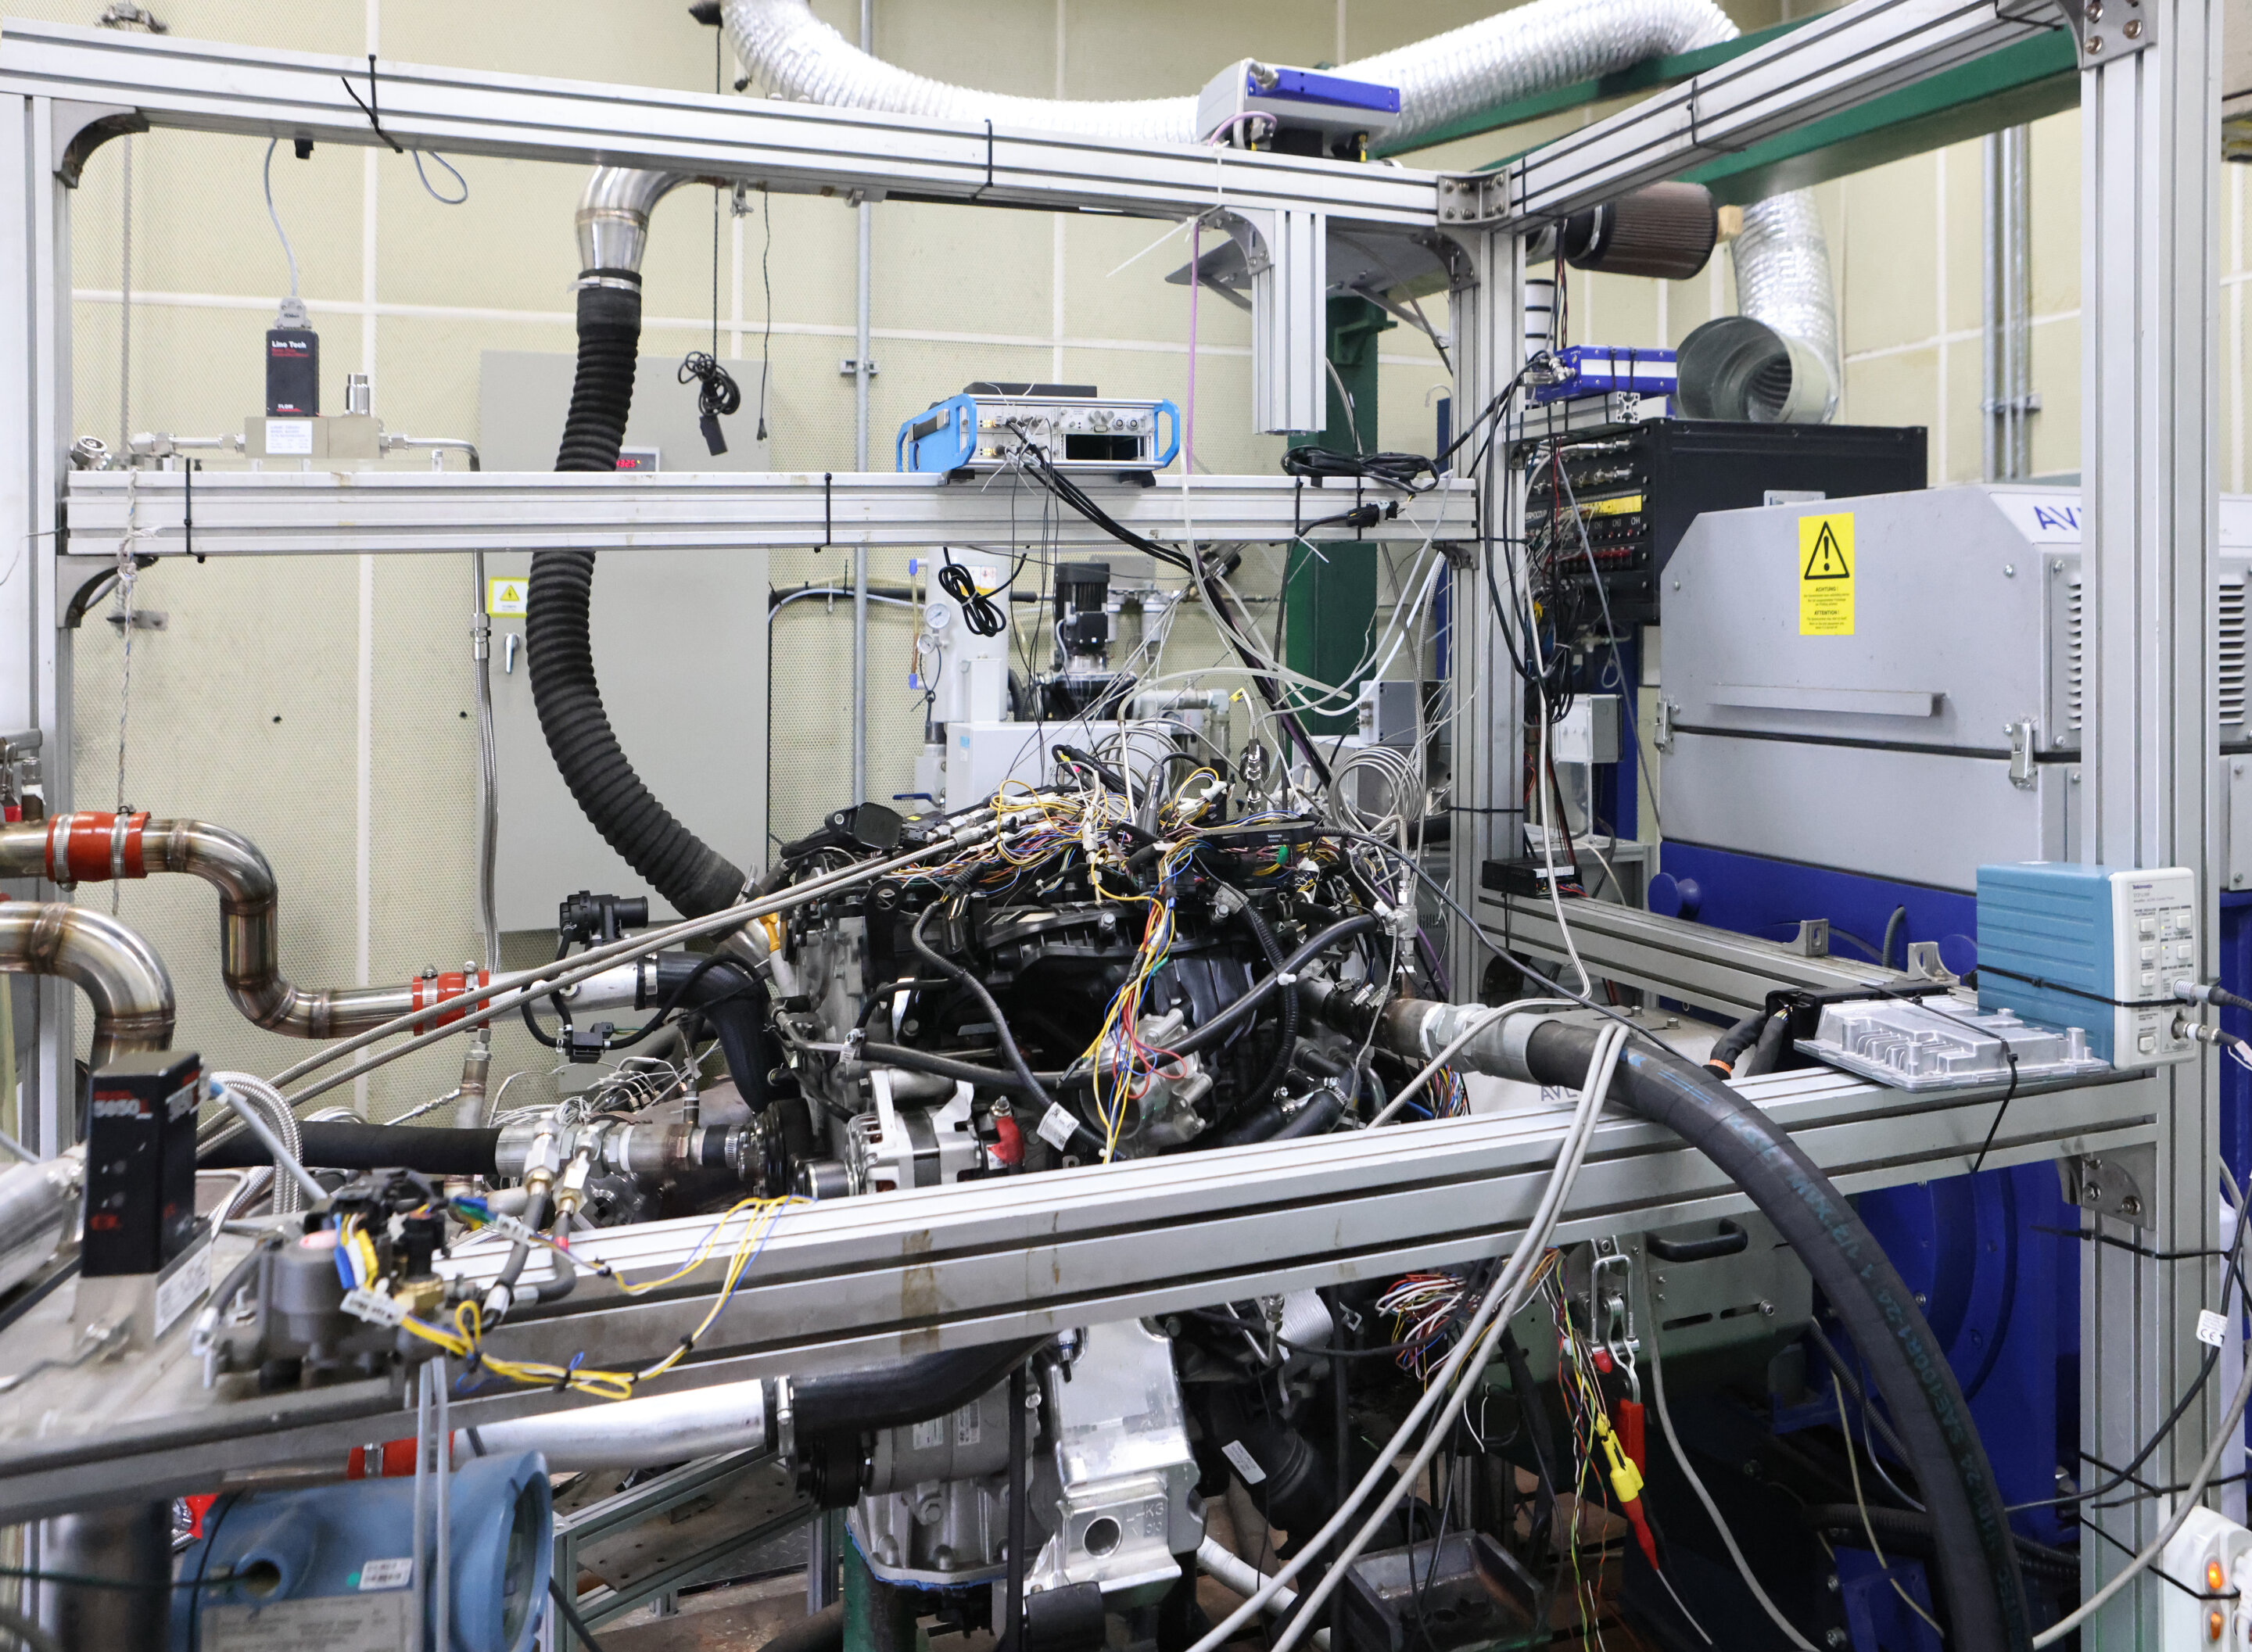 Research team develops 2-liter class hydrogen engine capable of running entirely on hydrogen